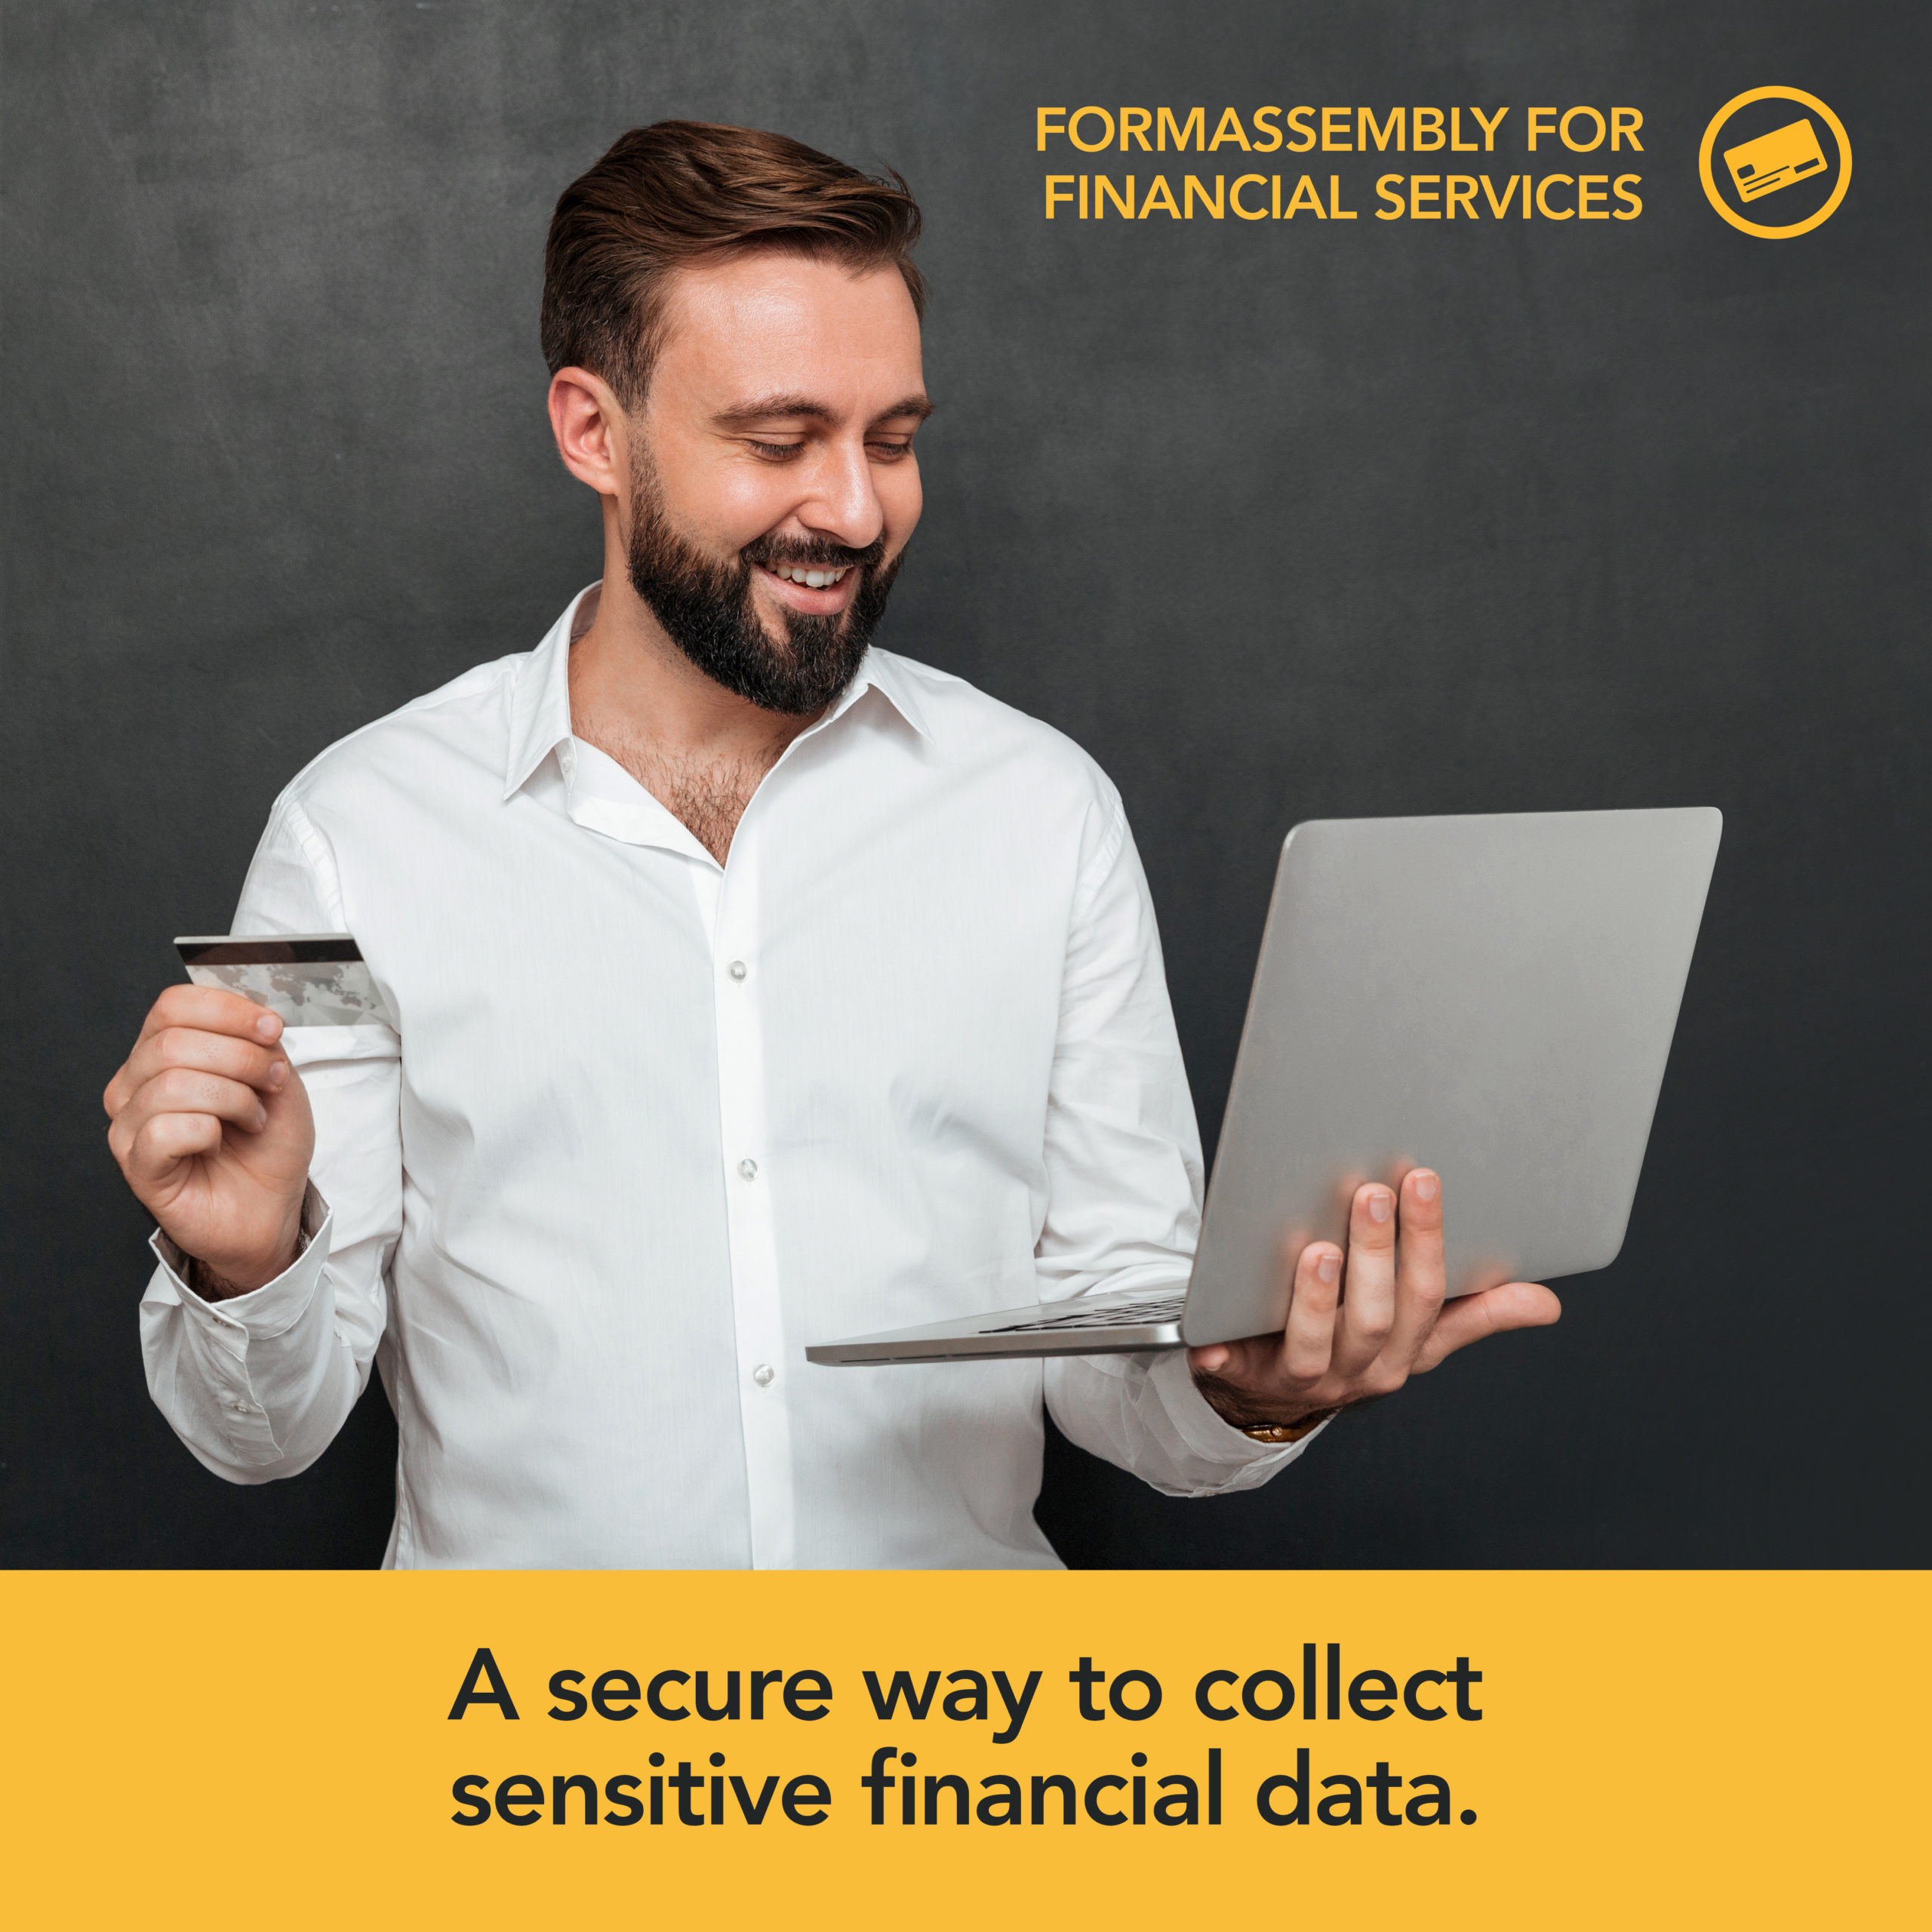 financial services data collection form solution